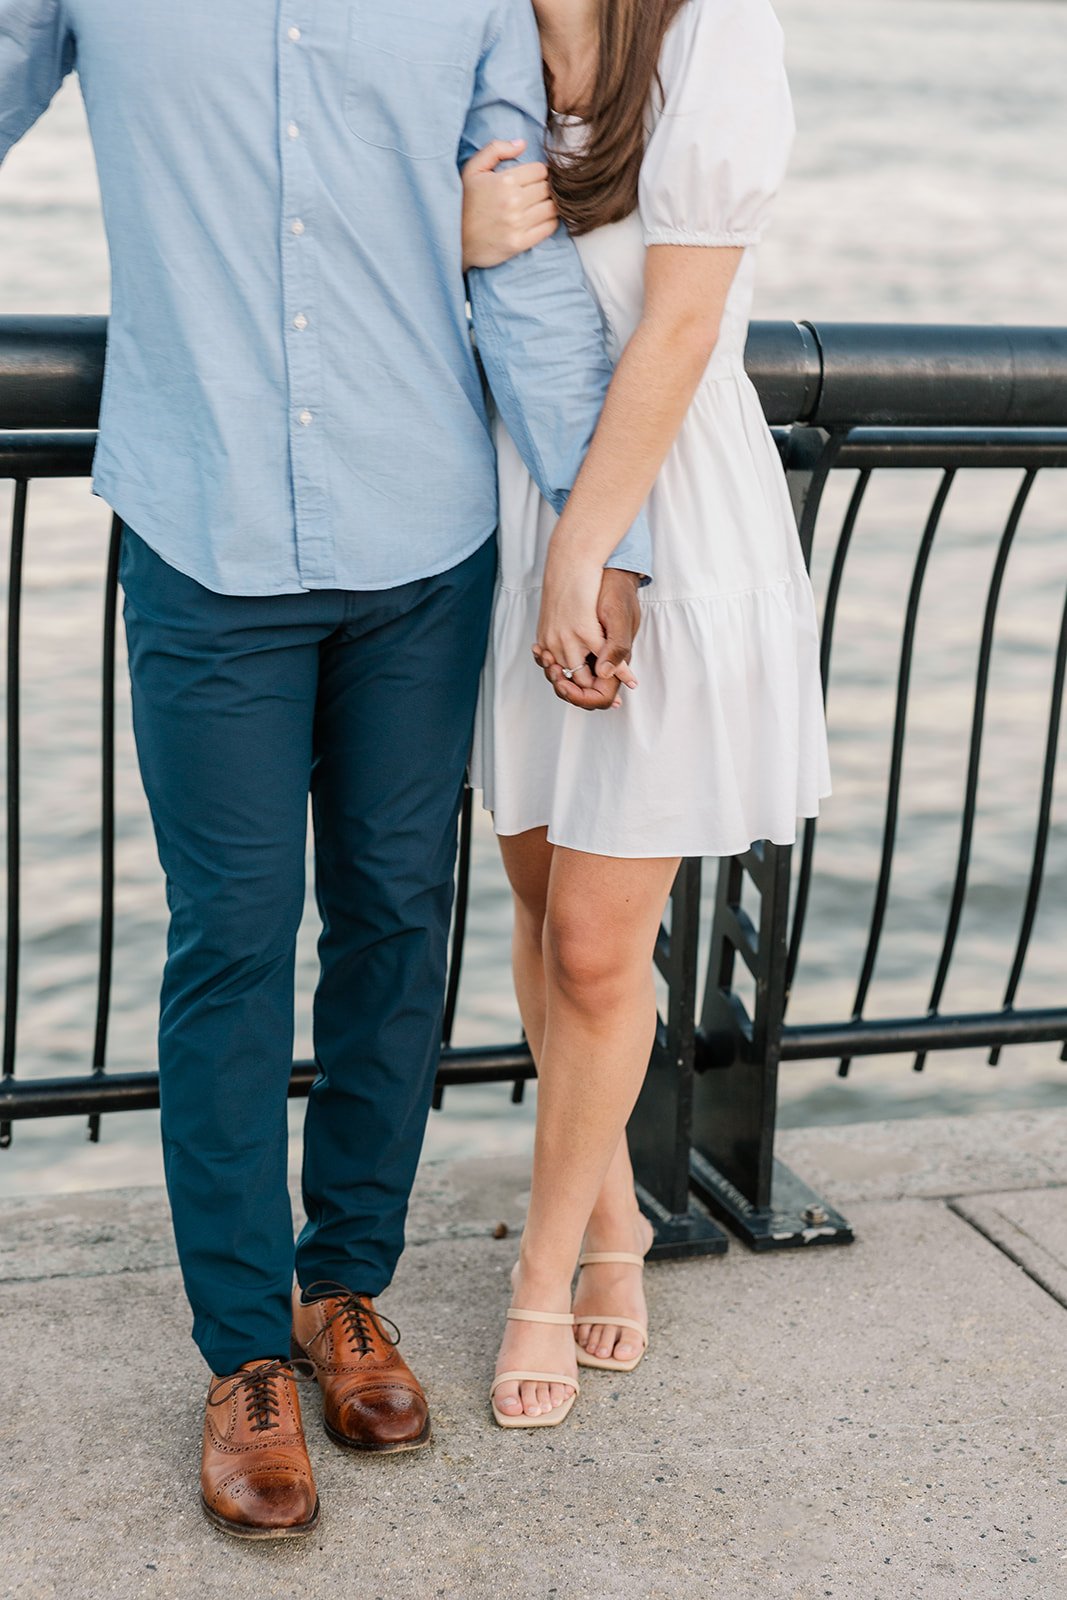 Kelly-Aaron-Engagement-Favs-By-Lizzie-Burger-Photo-106.jpg